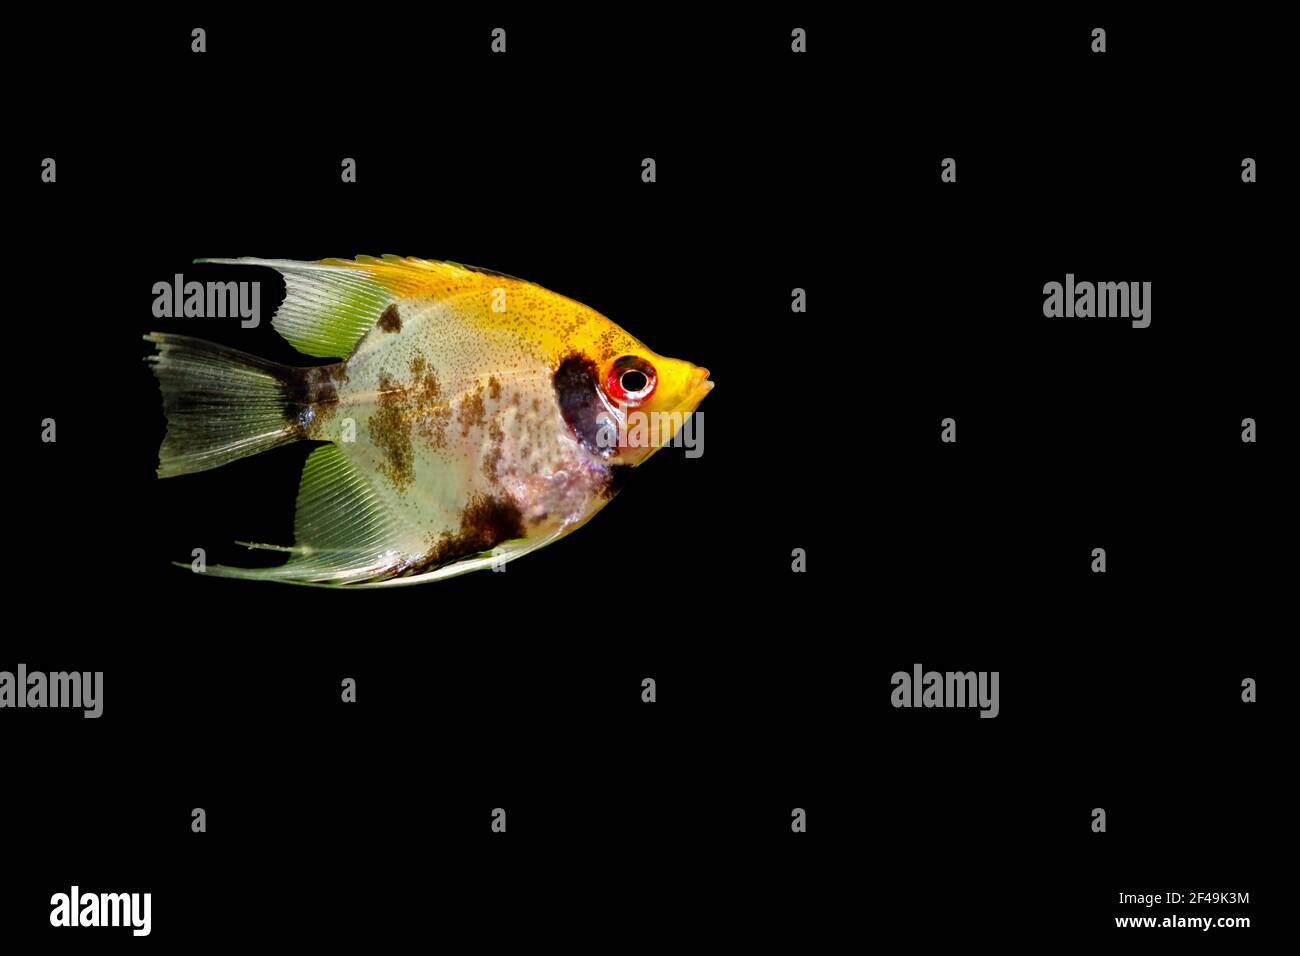 Angelfish (Pterophyllum scalare), also known as the freshwater angelfish, isolated in black background. Stock Photo